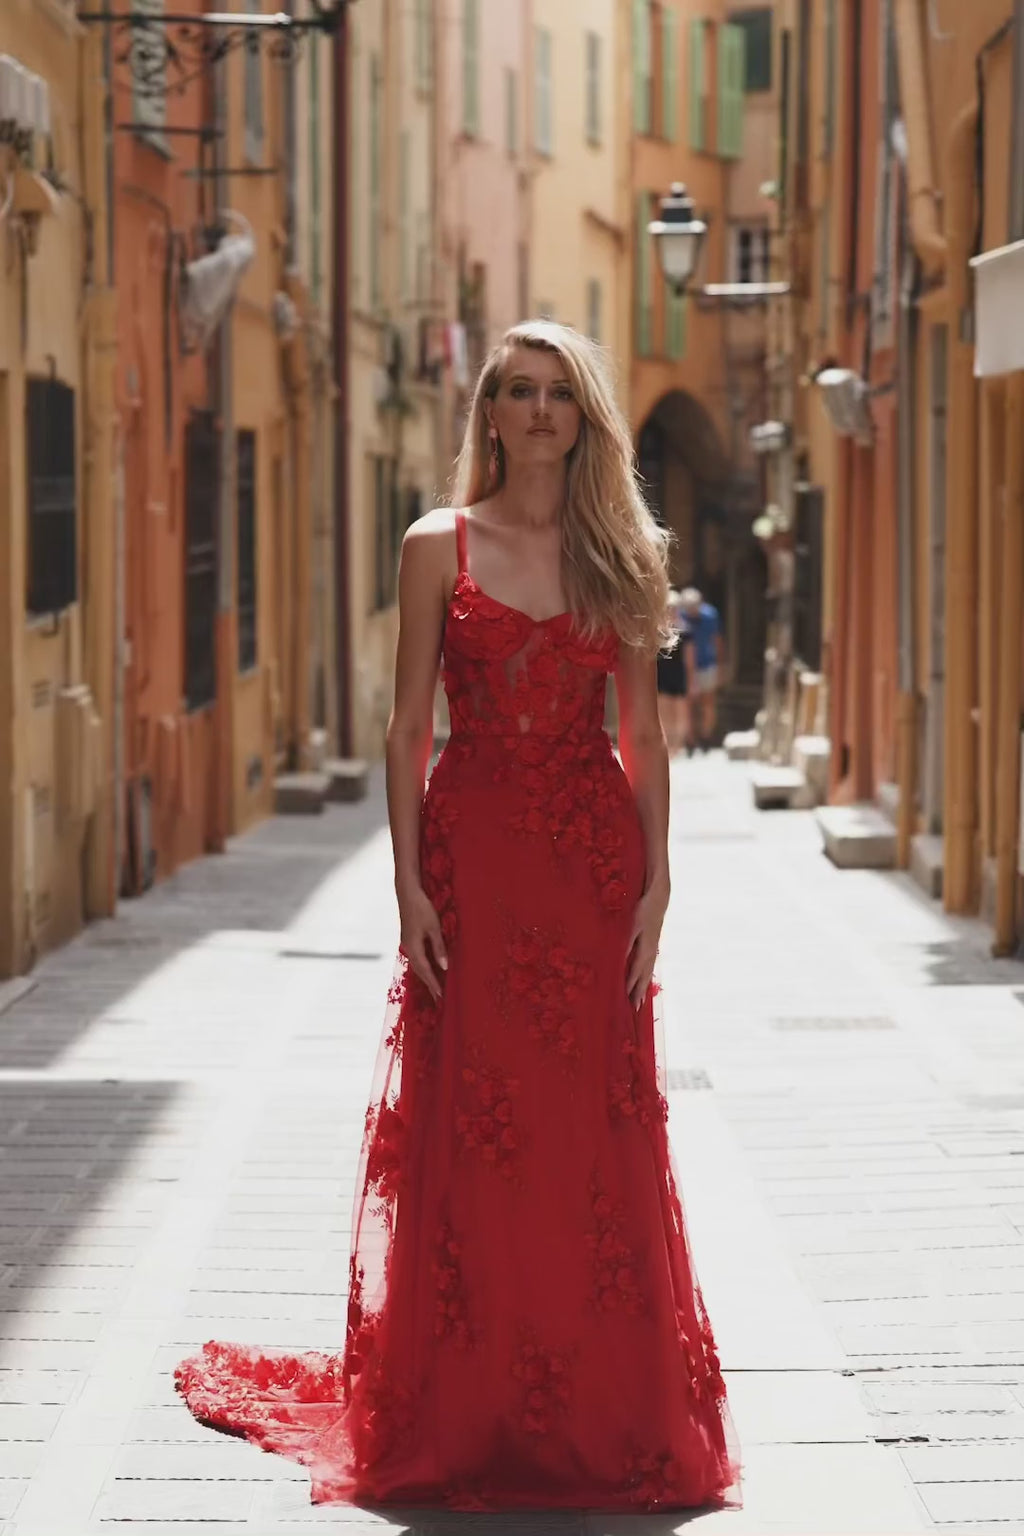 Magda - Red 3D Floral Gown with A-Line Silhouette